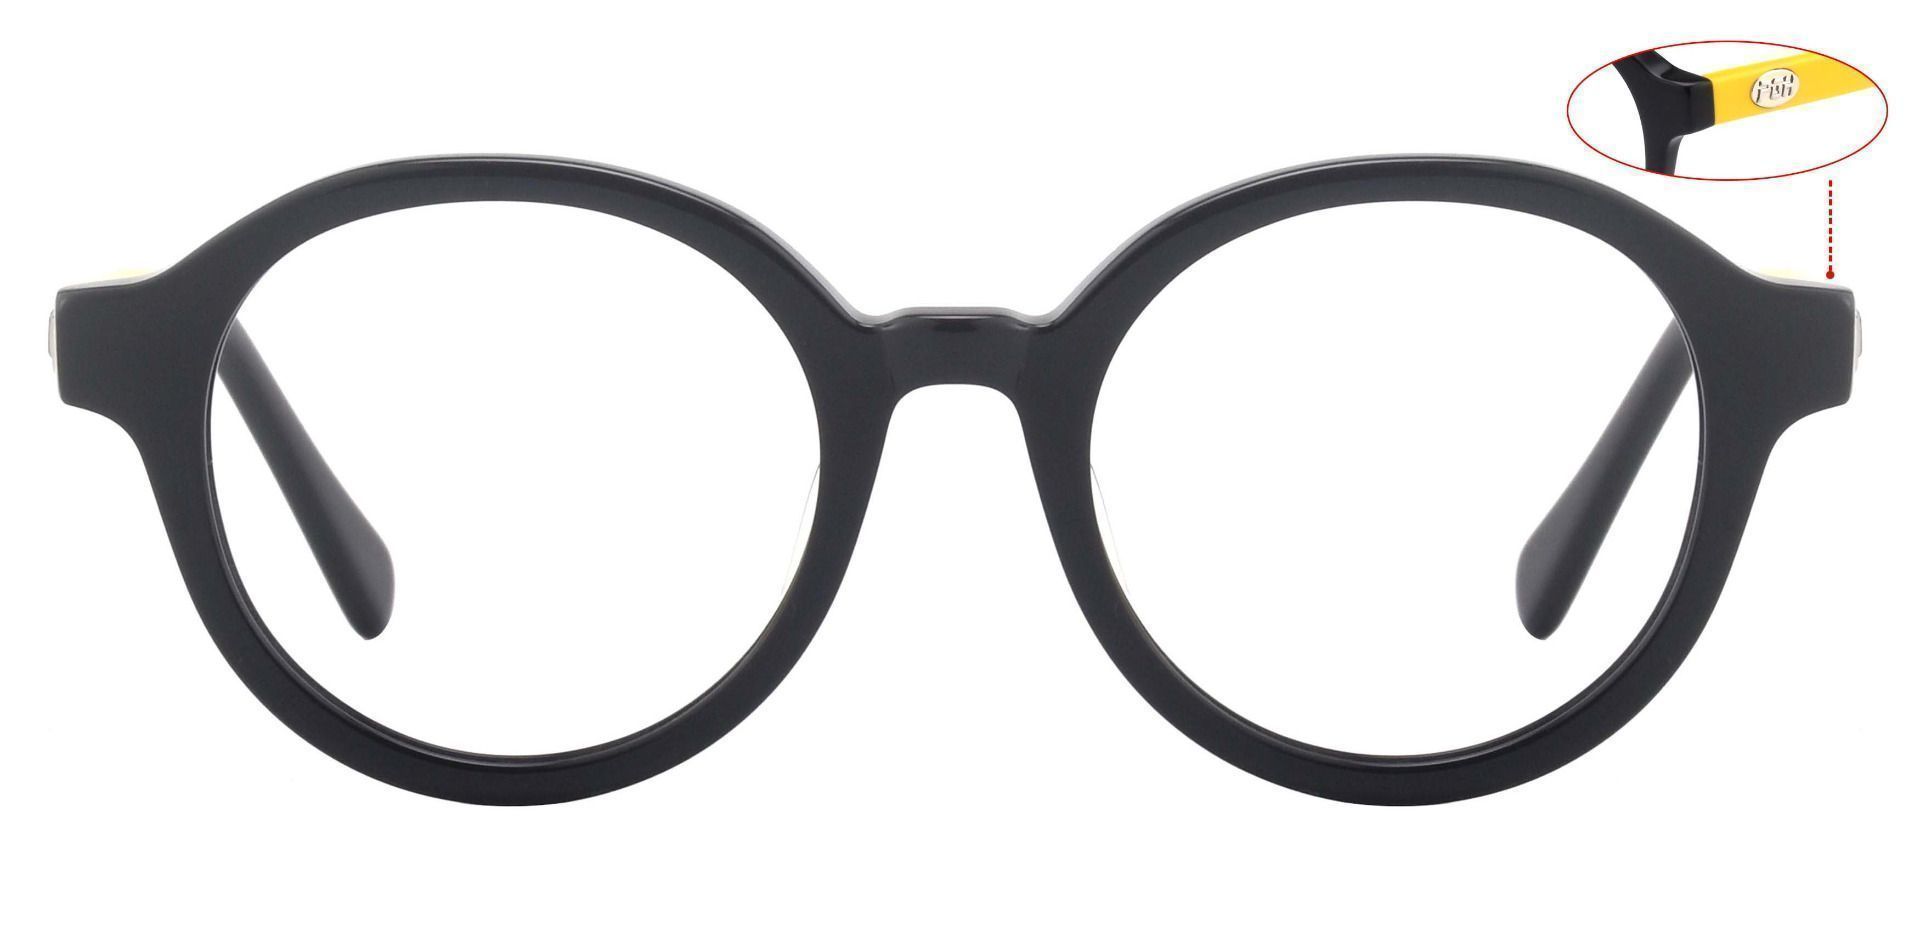 Champ Round Non-Rx Glasses - The Frame Is Black And Gold